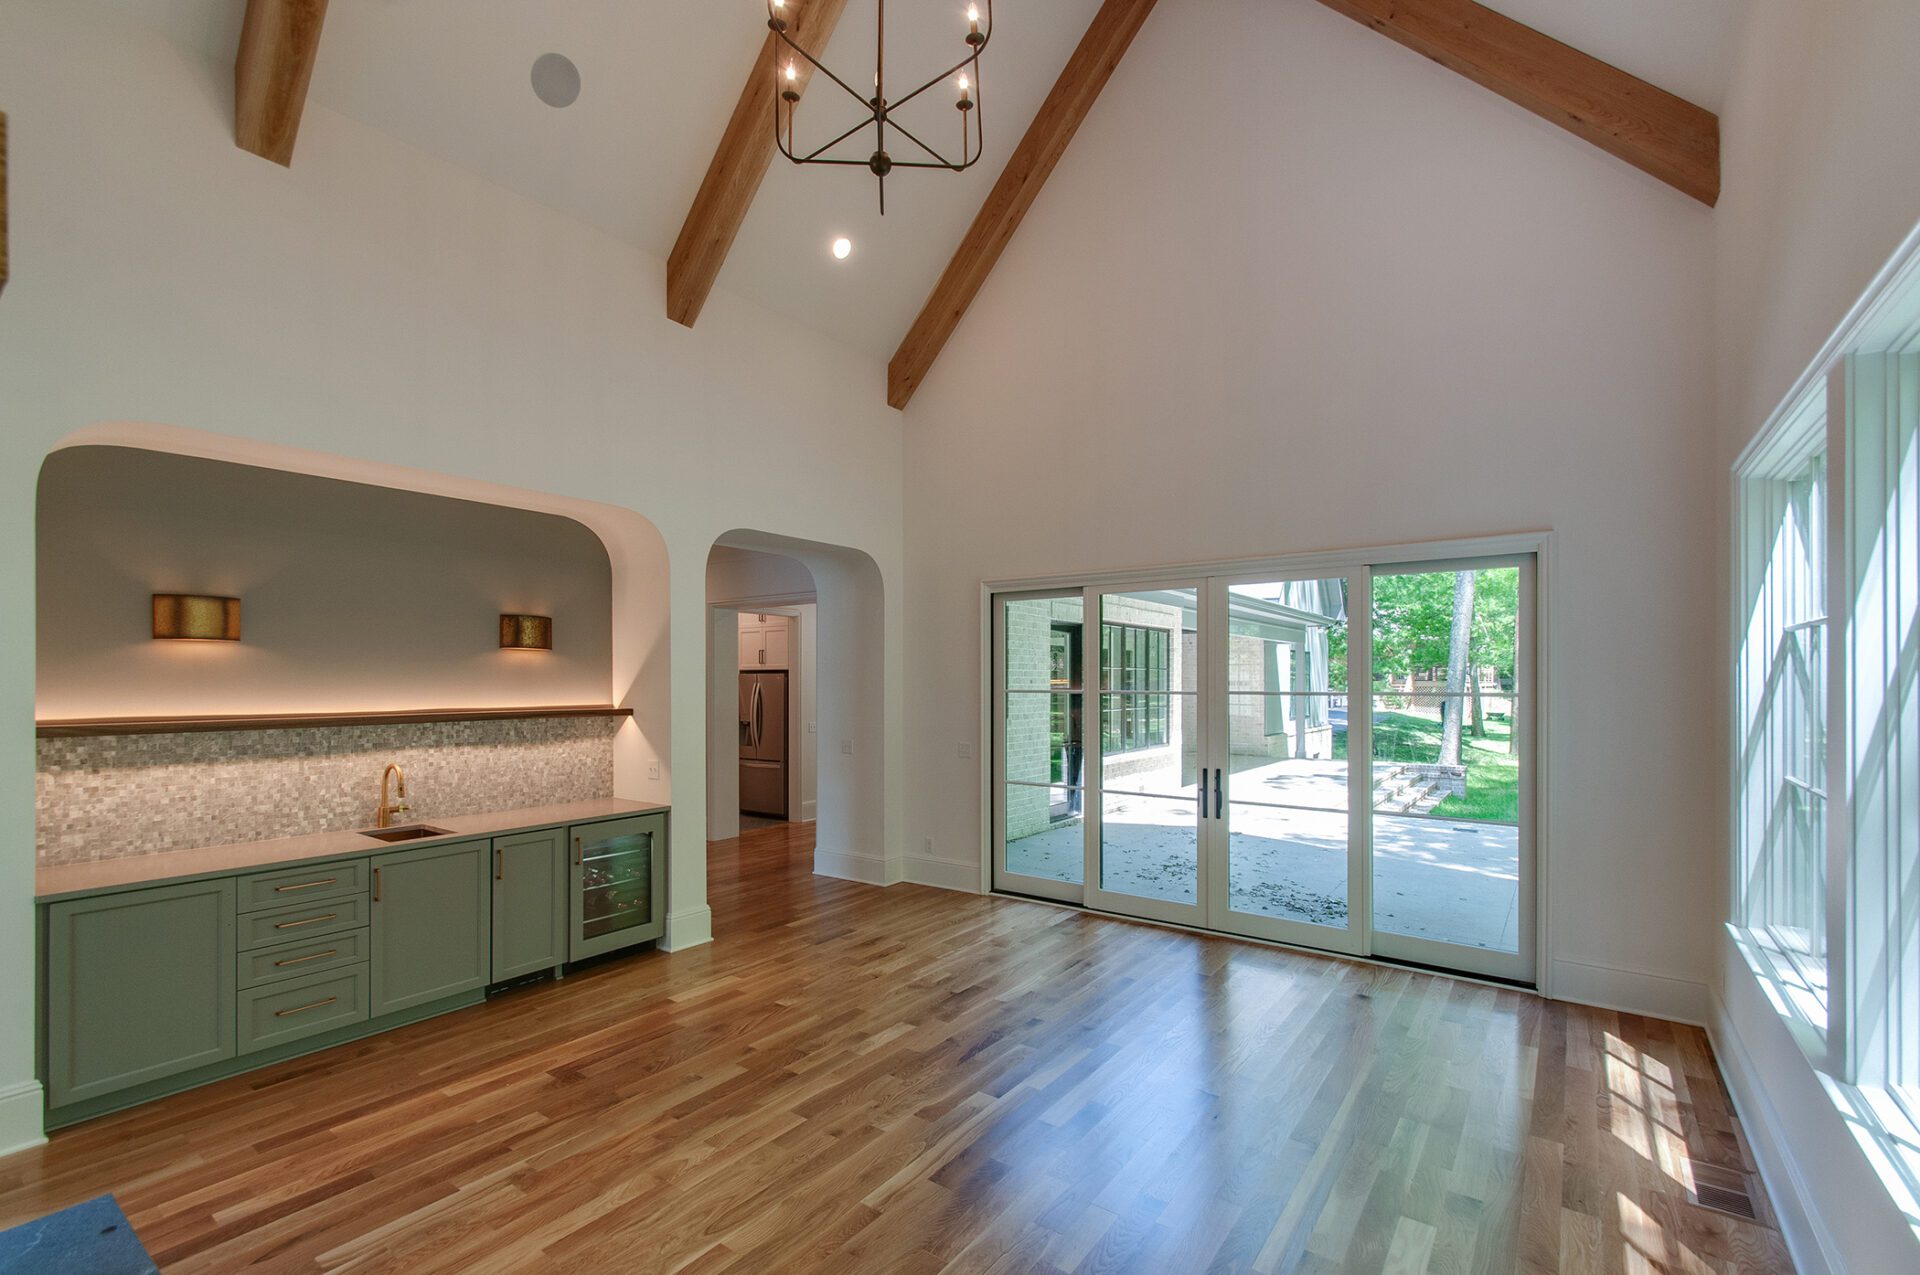 Inside a brand new home built by Nashville Residential Contractors